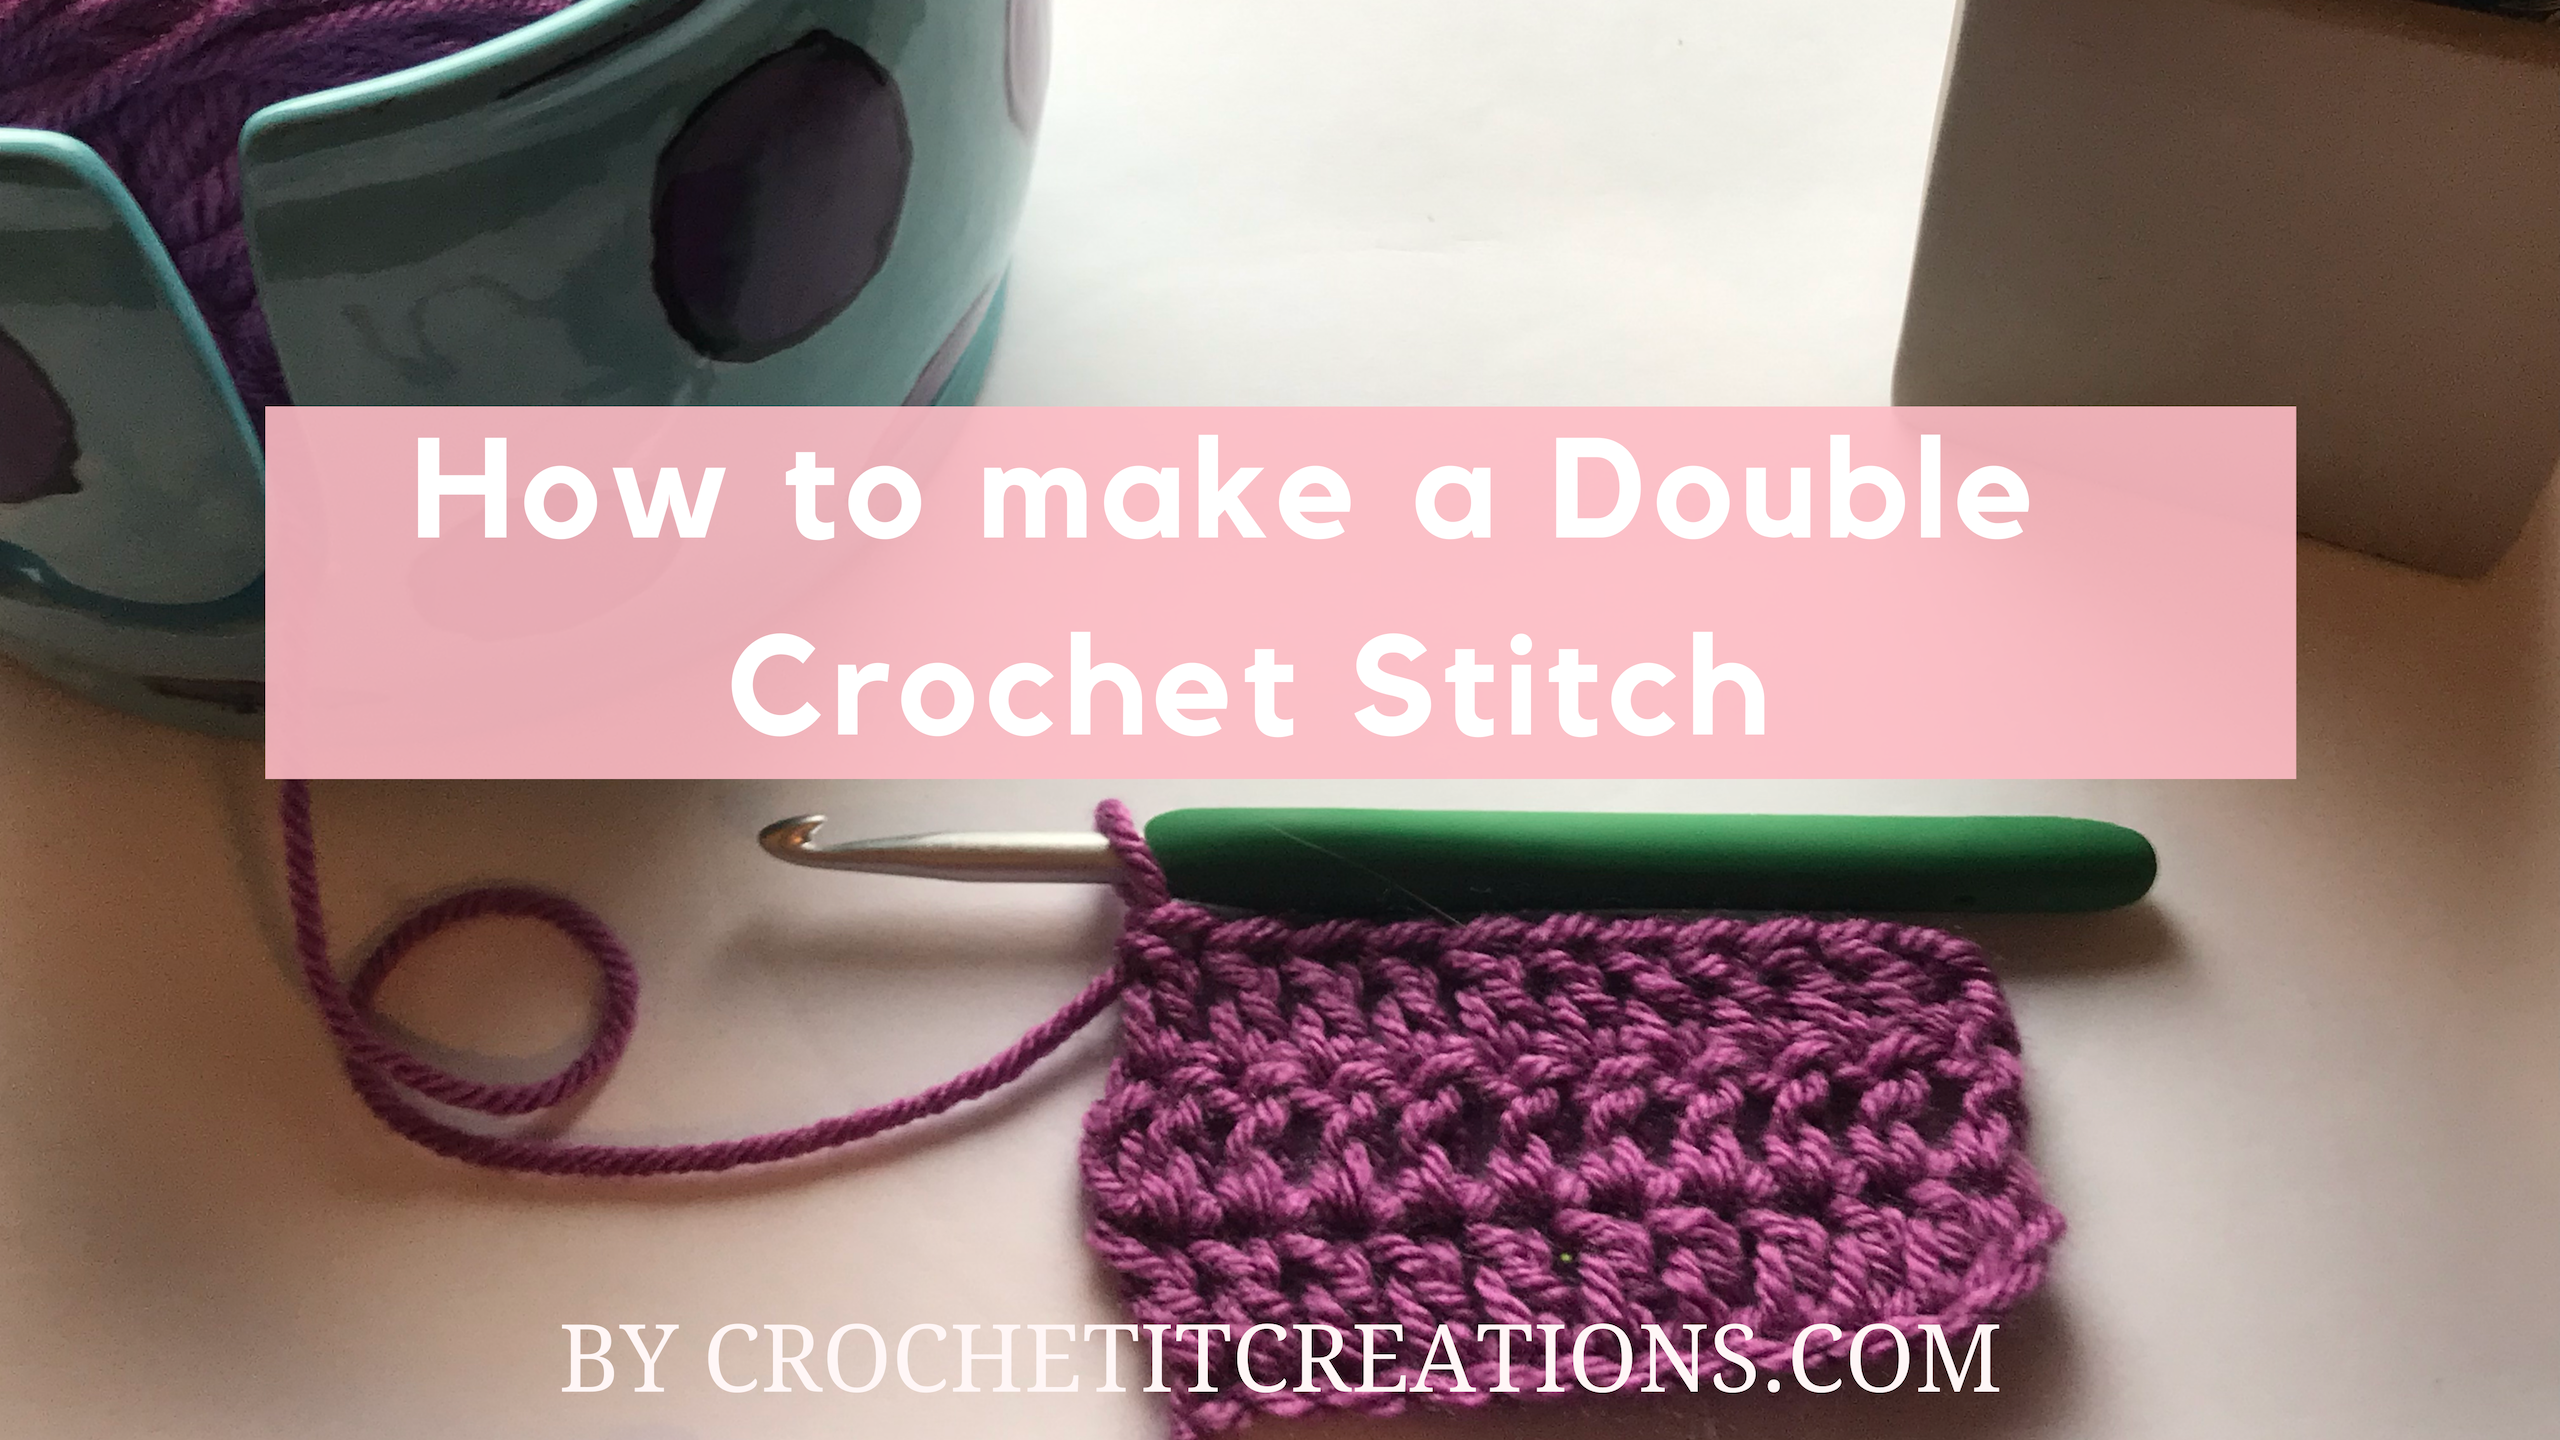 Learn how to crochet the double crochet stitch